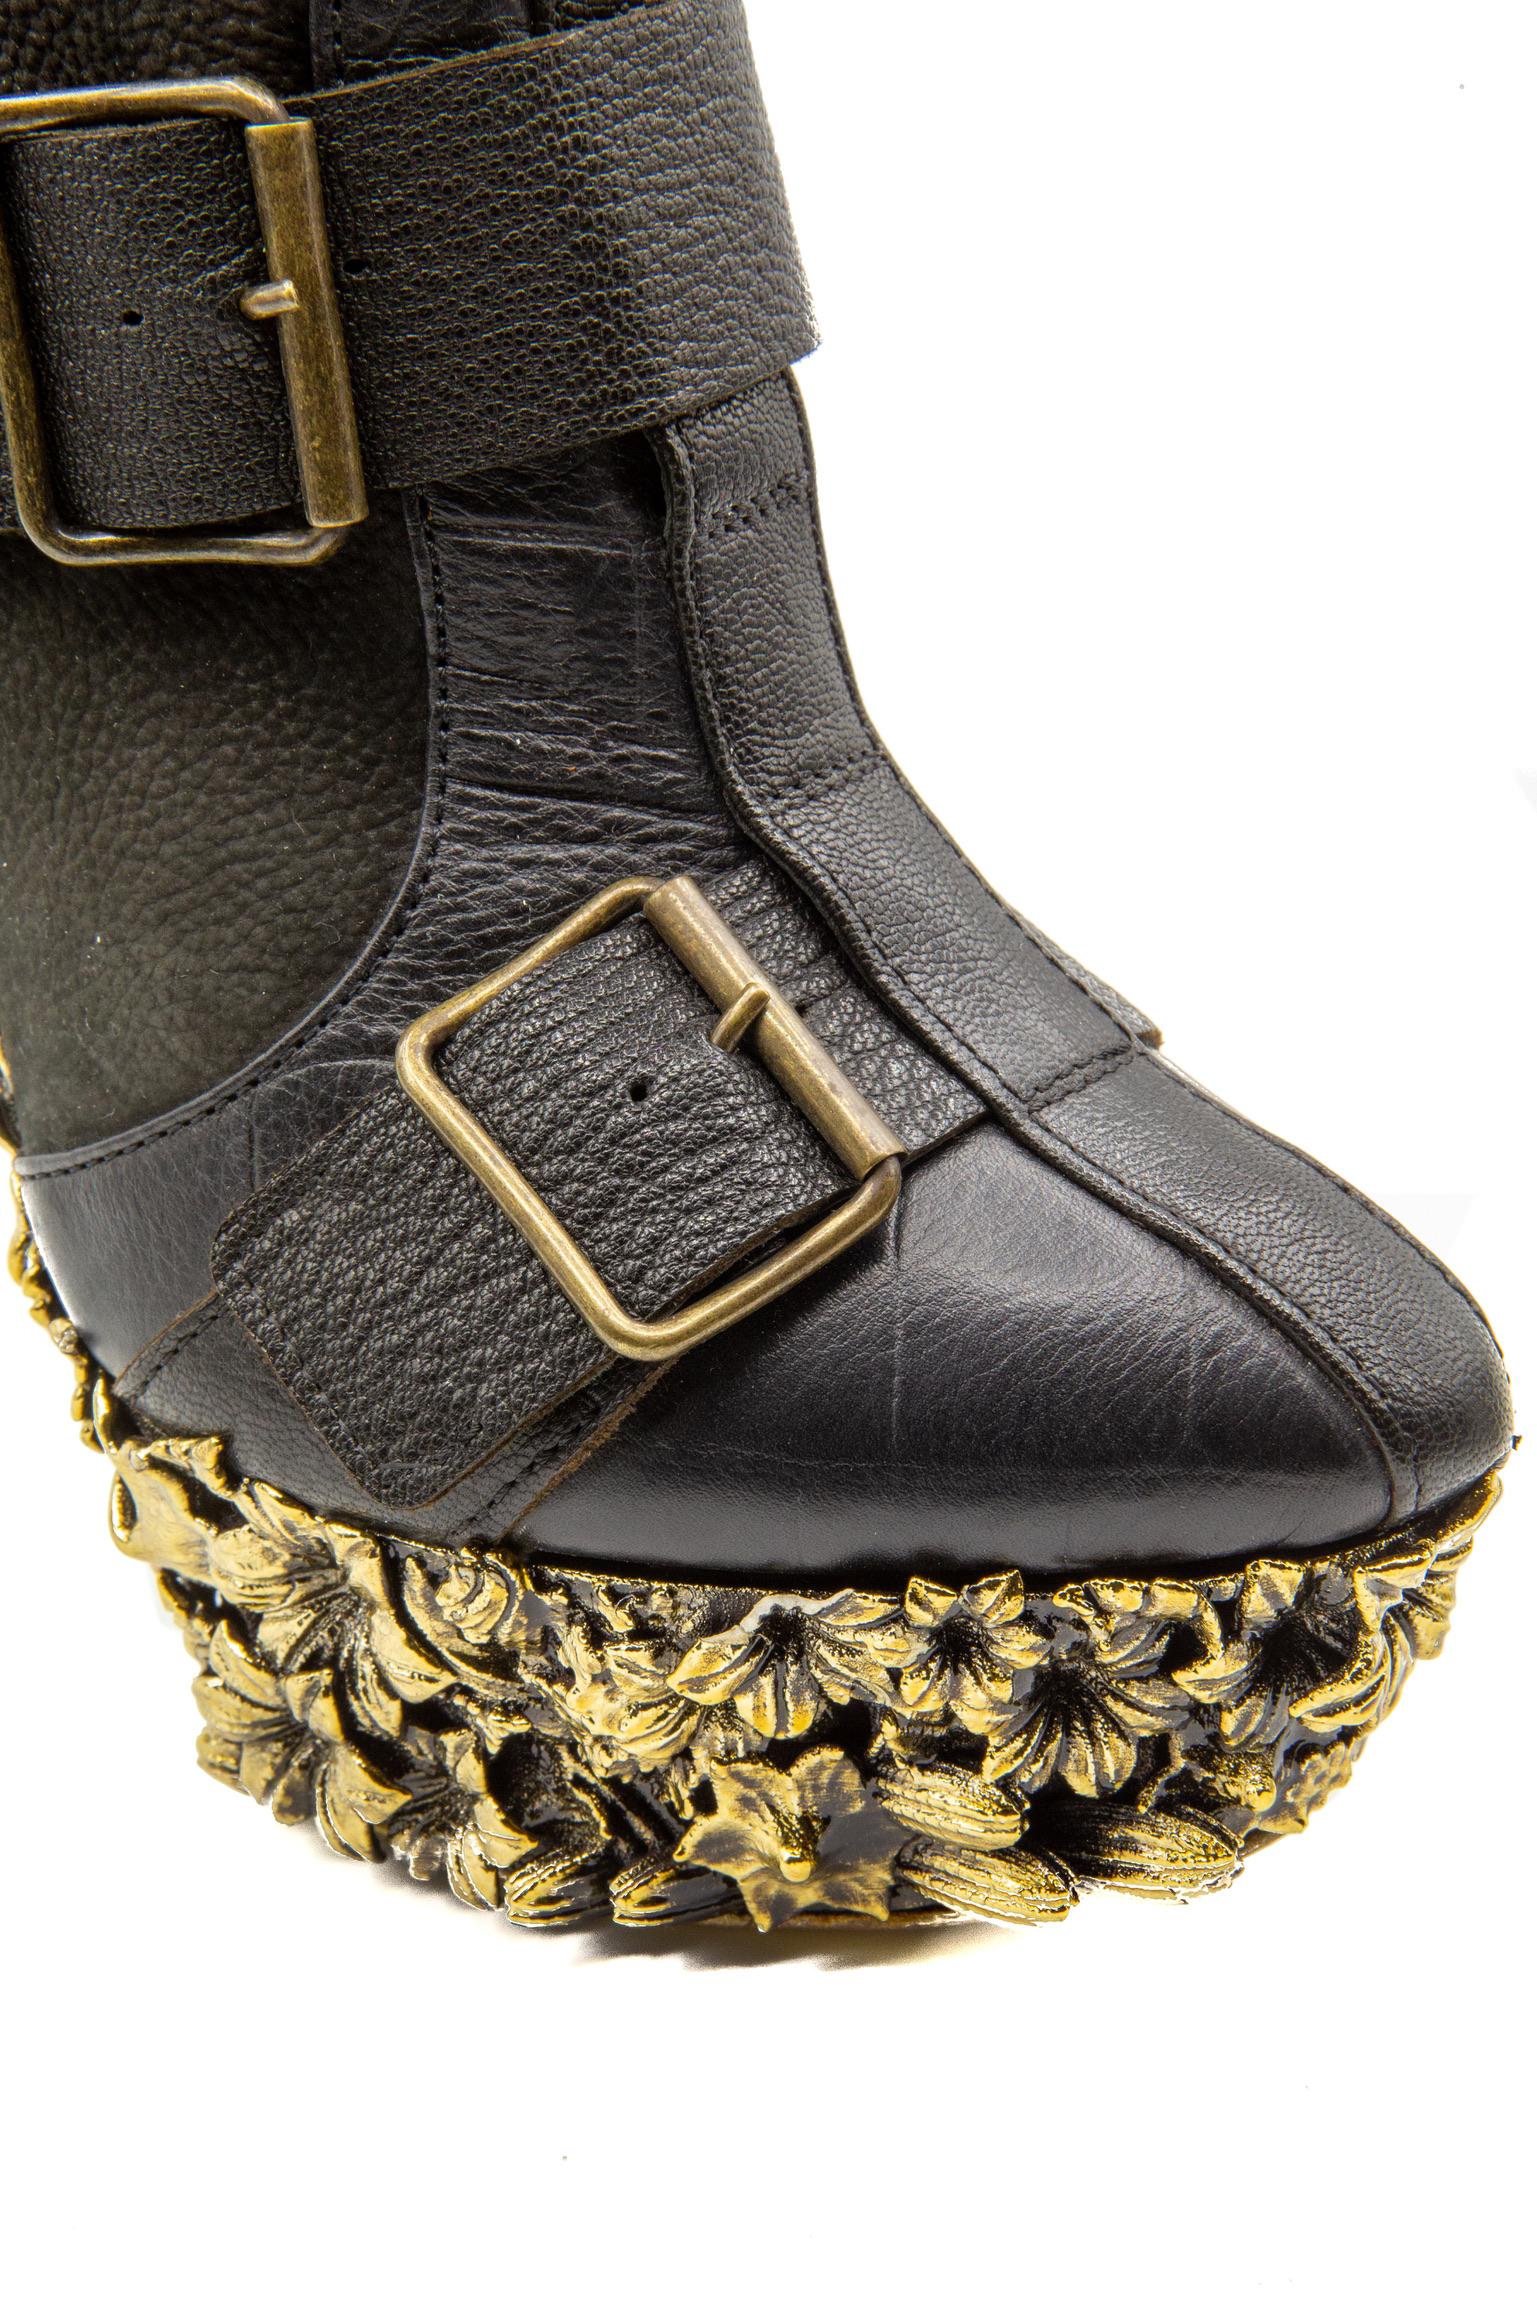 Alexander McQueen Fall 2010 Ready-To-Wear Black Leather Ankle Boots 1